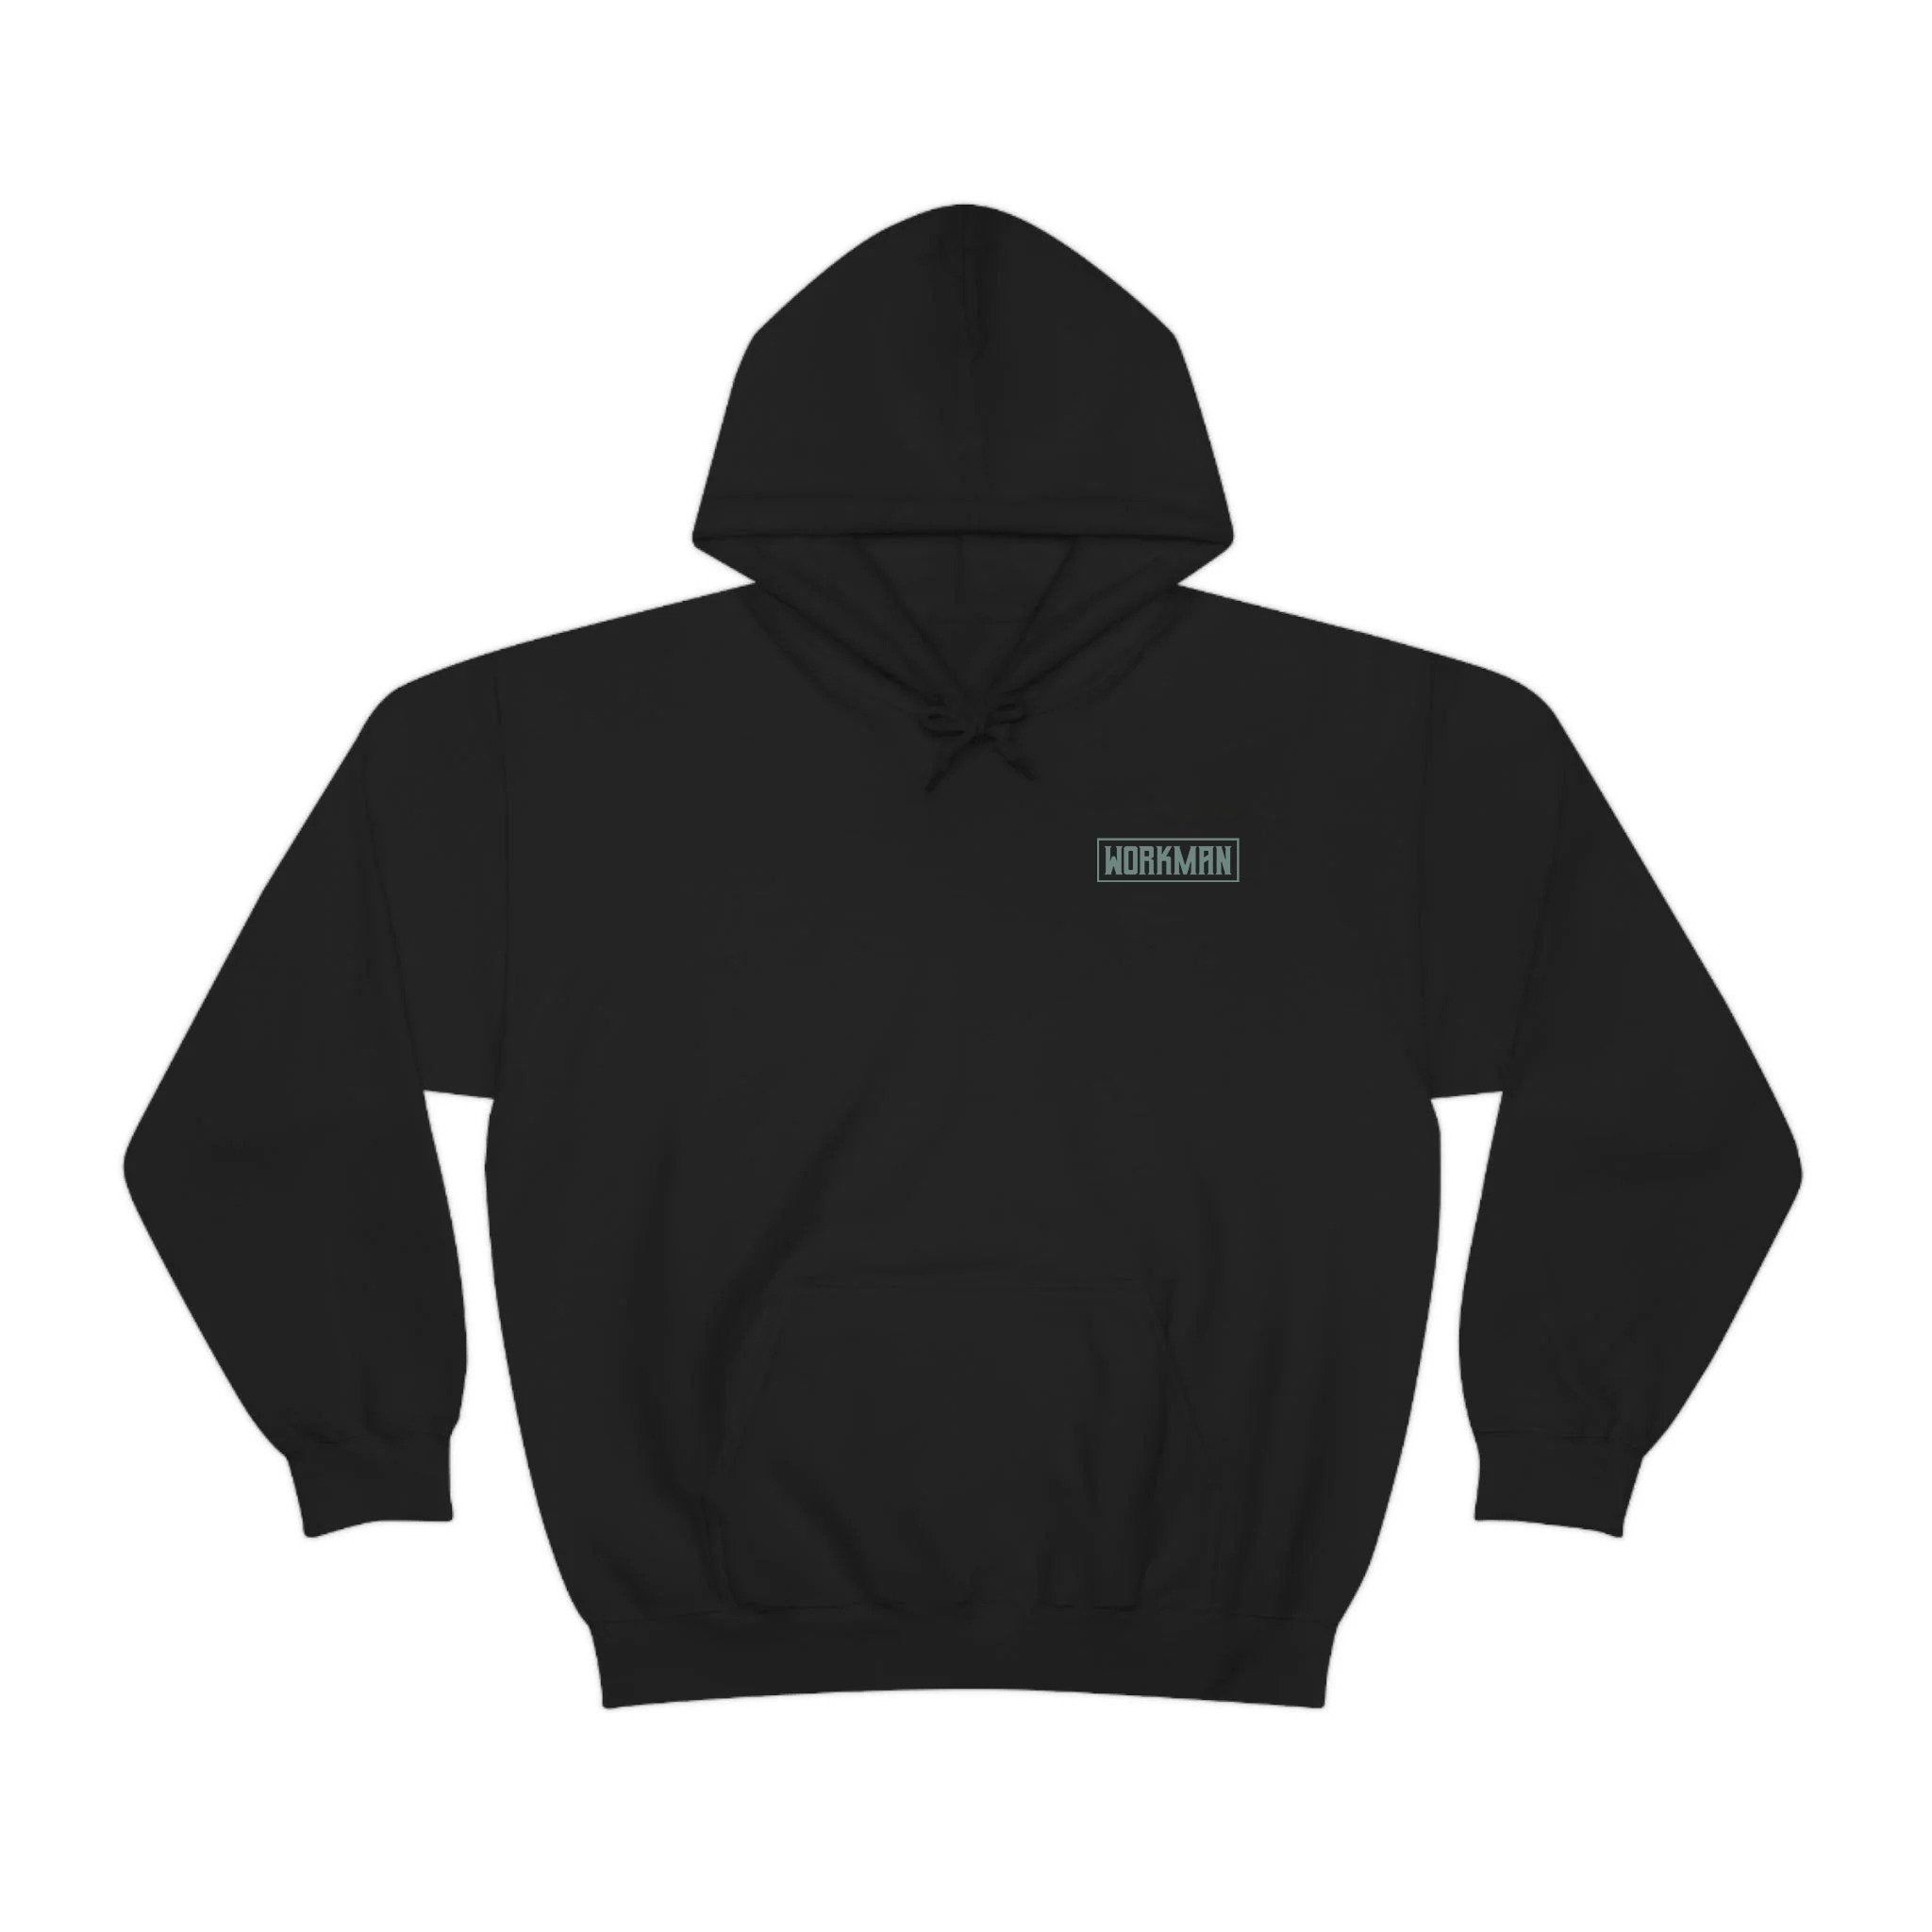 Overtime Hours - Hoodie - Workman Trading Co.